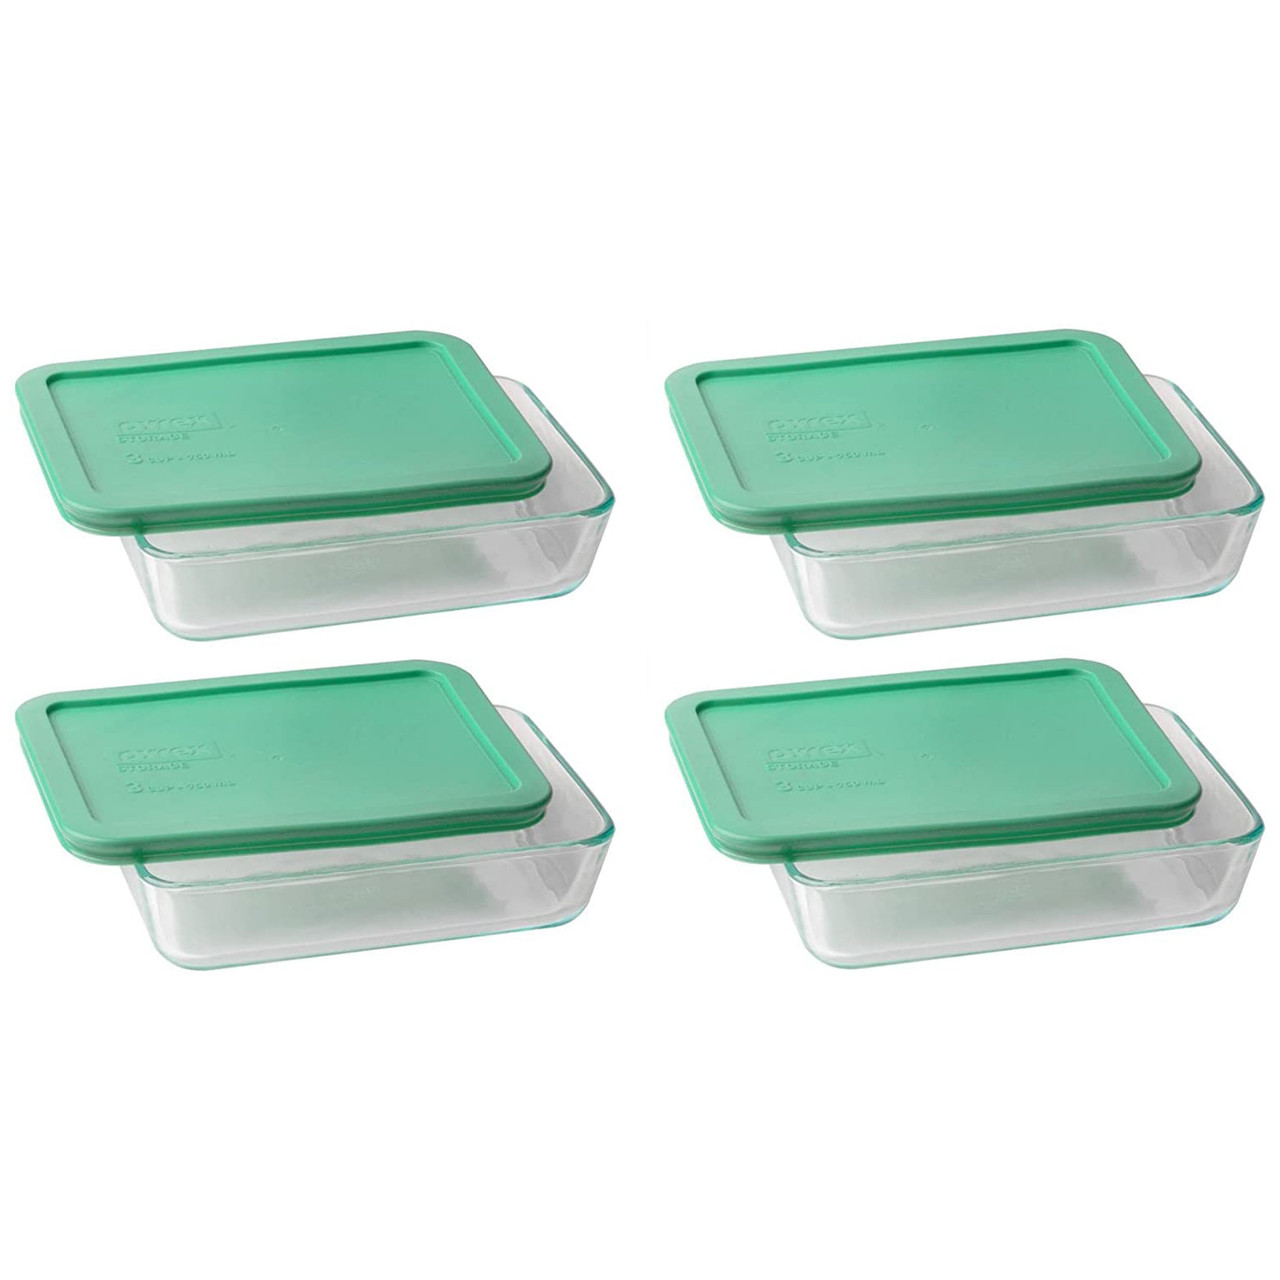 Pyrex Simply Store 3-Cup Rectangle Glass Storage Container with